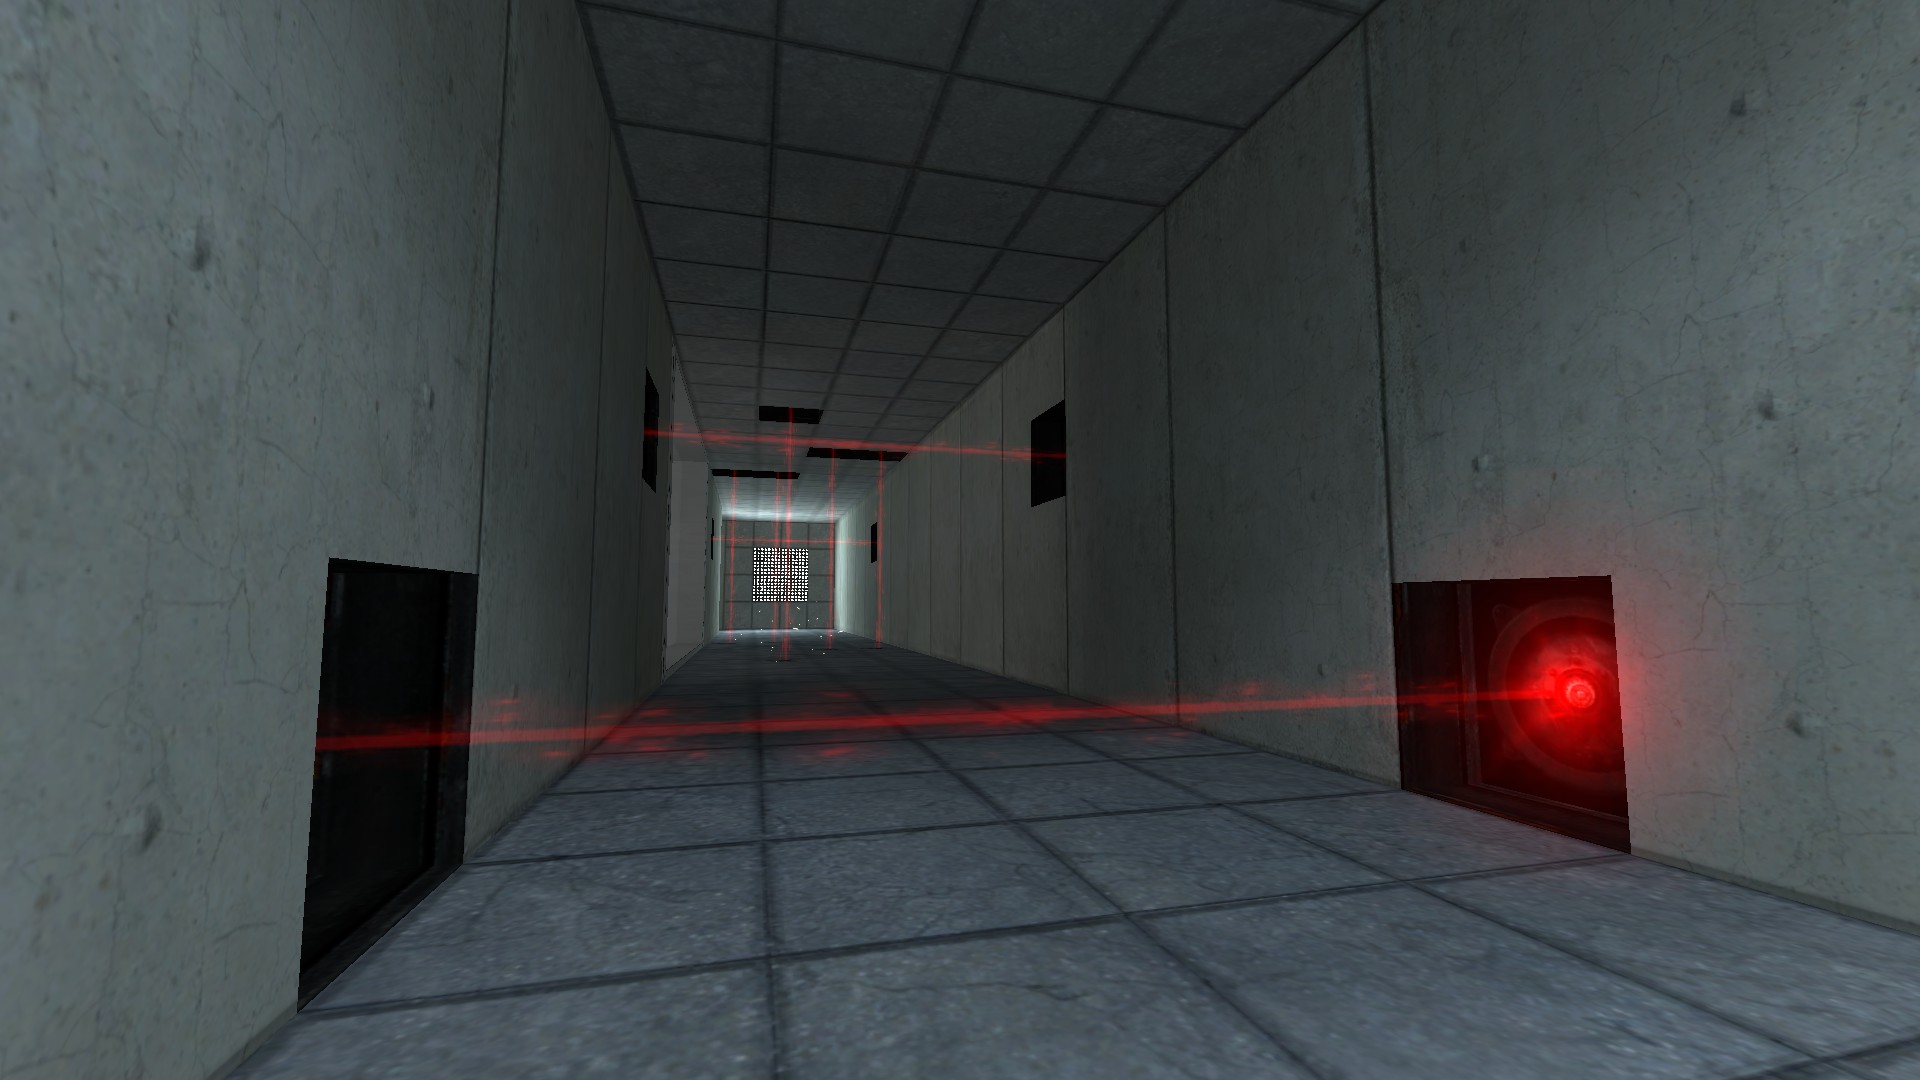 A hall has deadly lasers criss-crossing it.